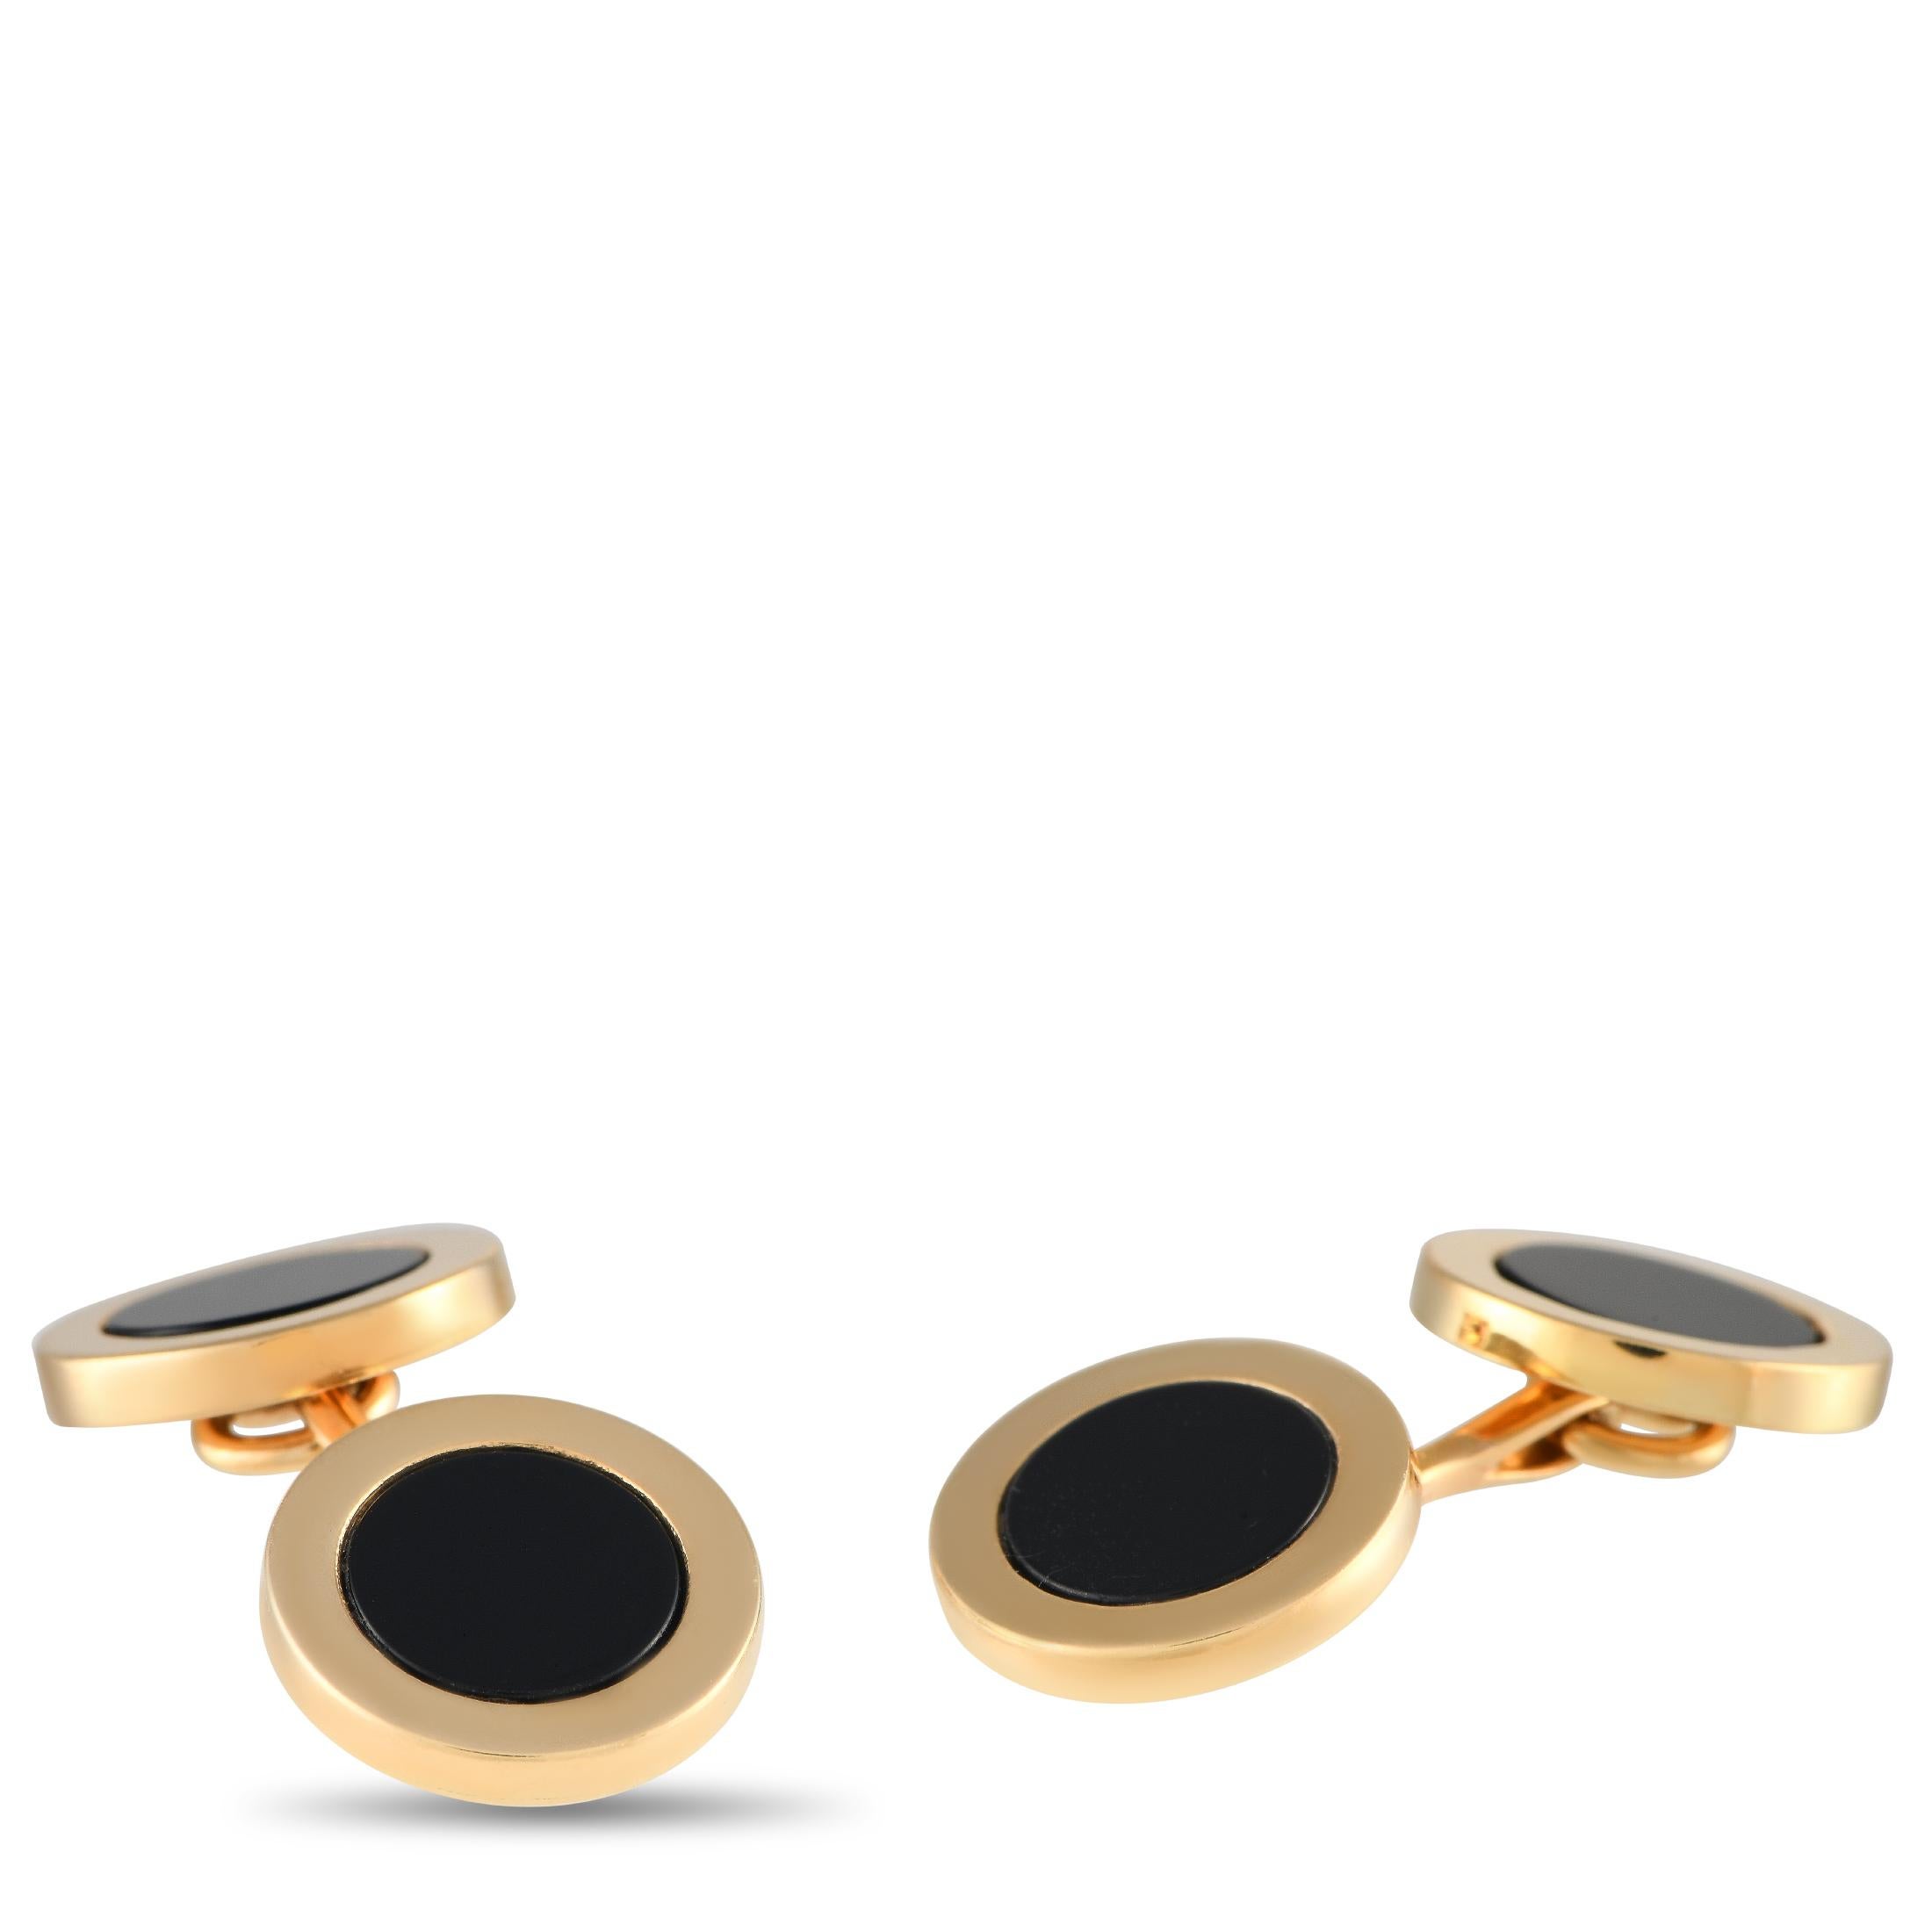 A minimalist design makes these Tiffany & Co. Cufflinks ideal for virtually any suited ensemble. Crafted from 14K Yellow Gold, each one measures 1.05” long, 0.50” wide, and includes a circular onyx stone at the center. 
 
 This jewelry piece is